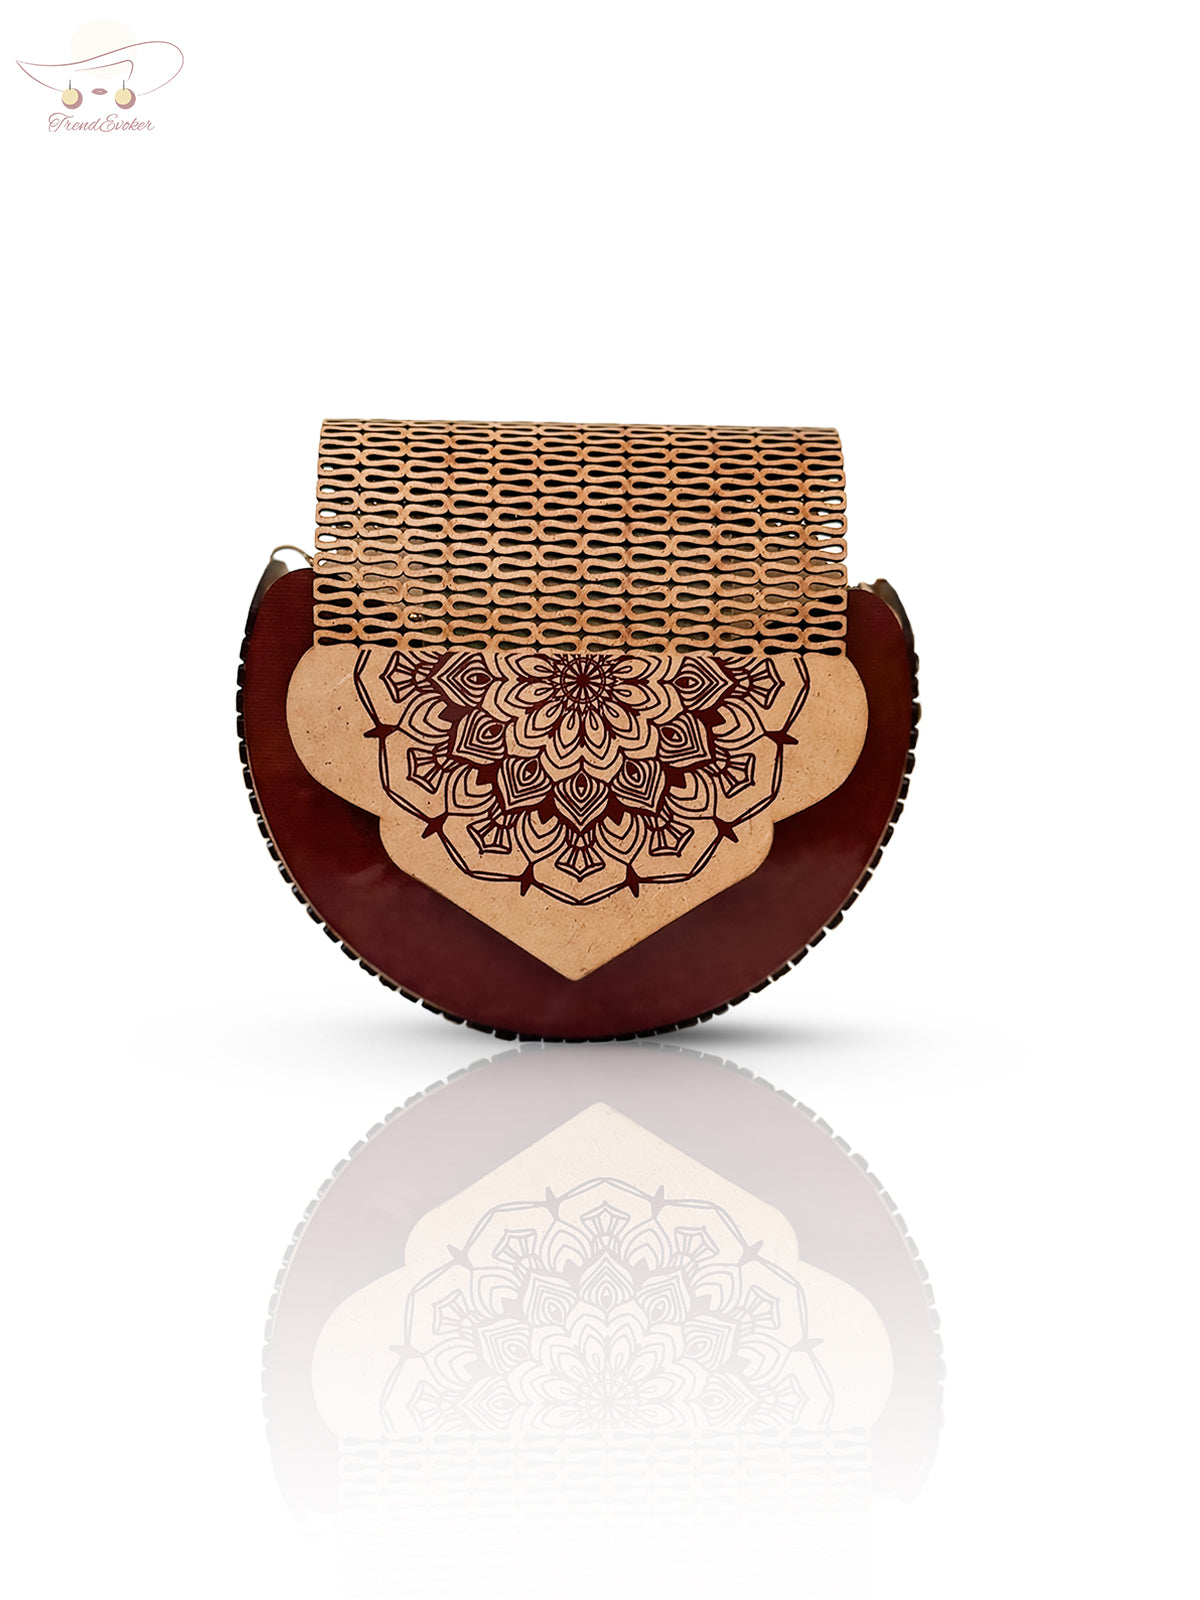 Handmade Brown Heart-Shaped Wooden Purse: An Aesthetic and Cultural Statement Piece with Handcrafted Design